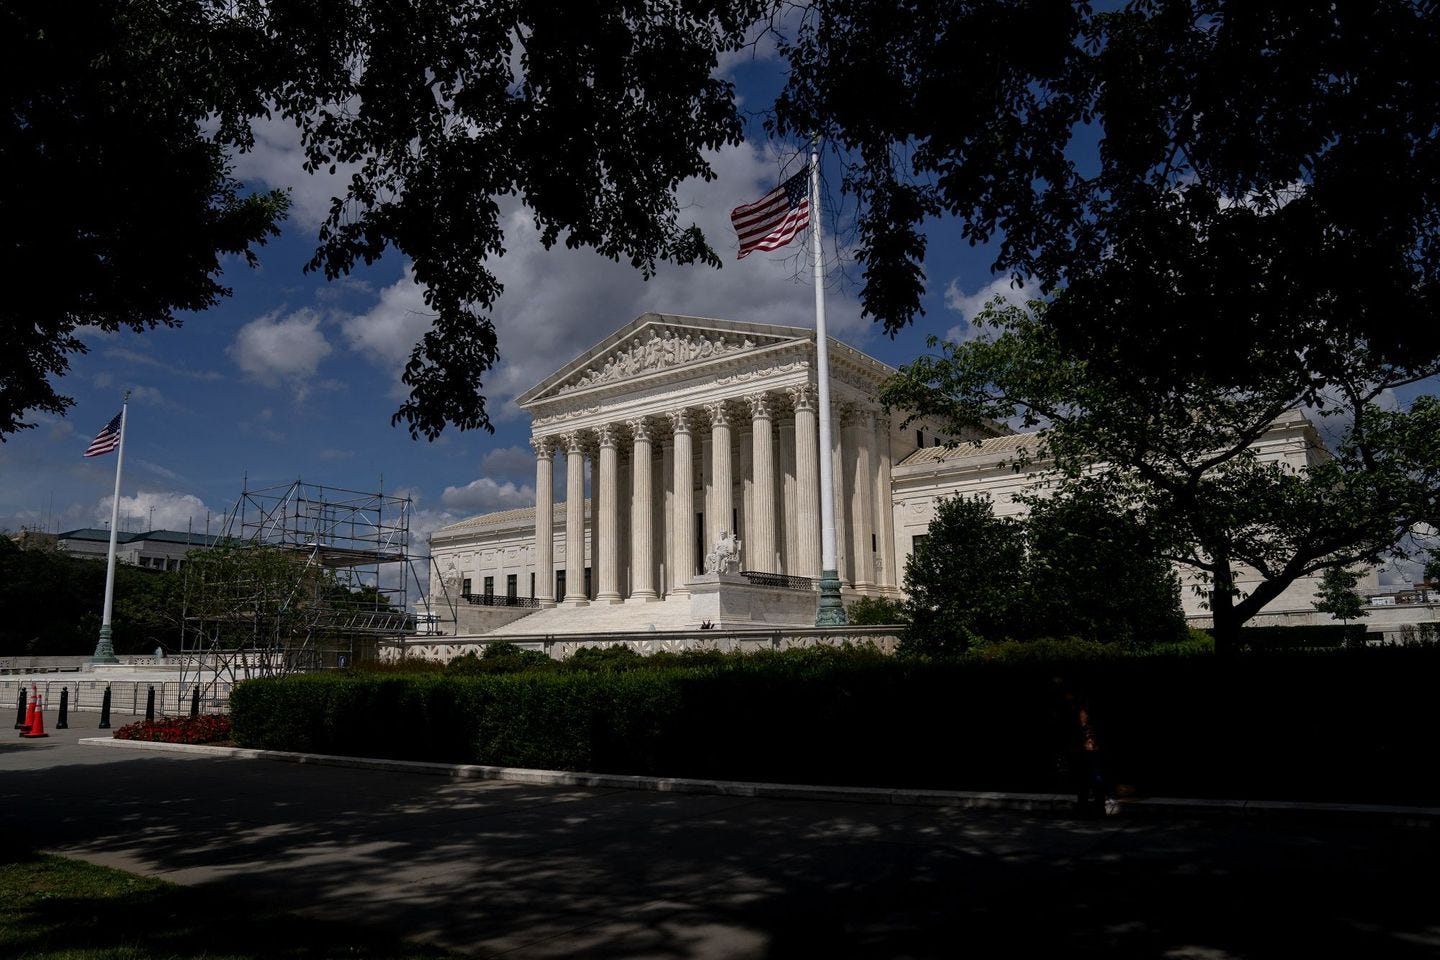 The US Supreme Court in Washington, D.C., on Saturday.